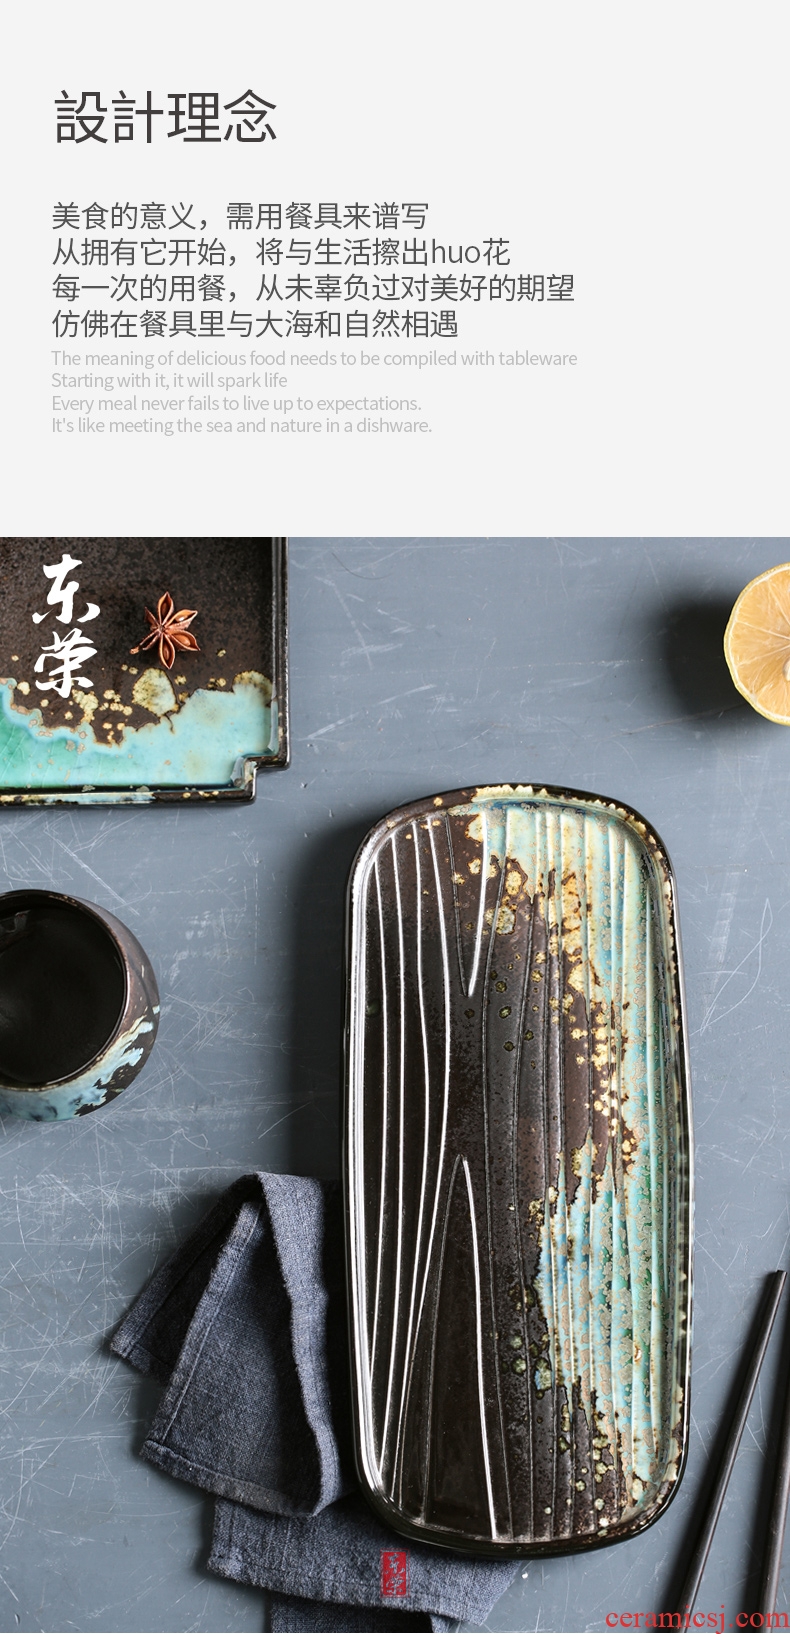 Dong rong Japanese ceramic dish food dish rectangular flat plate of creative commercial sushi plate sashimi dish plate cake plate